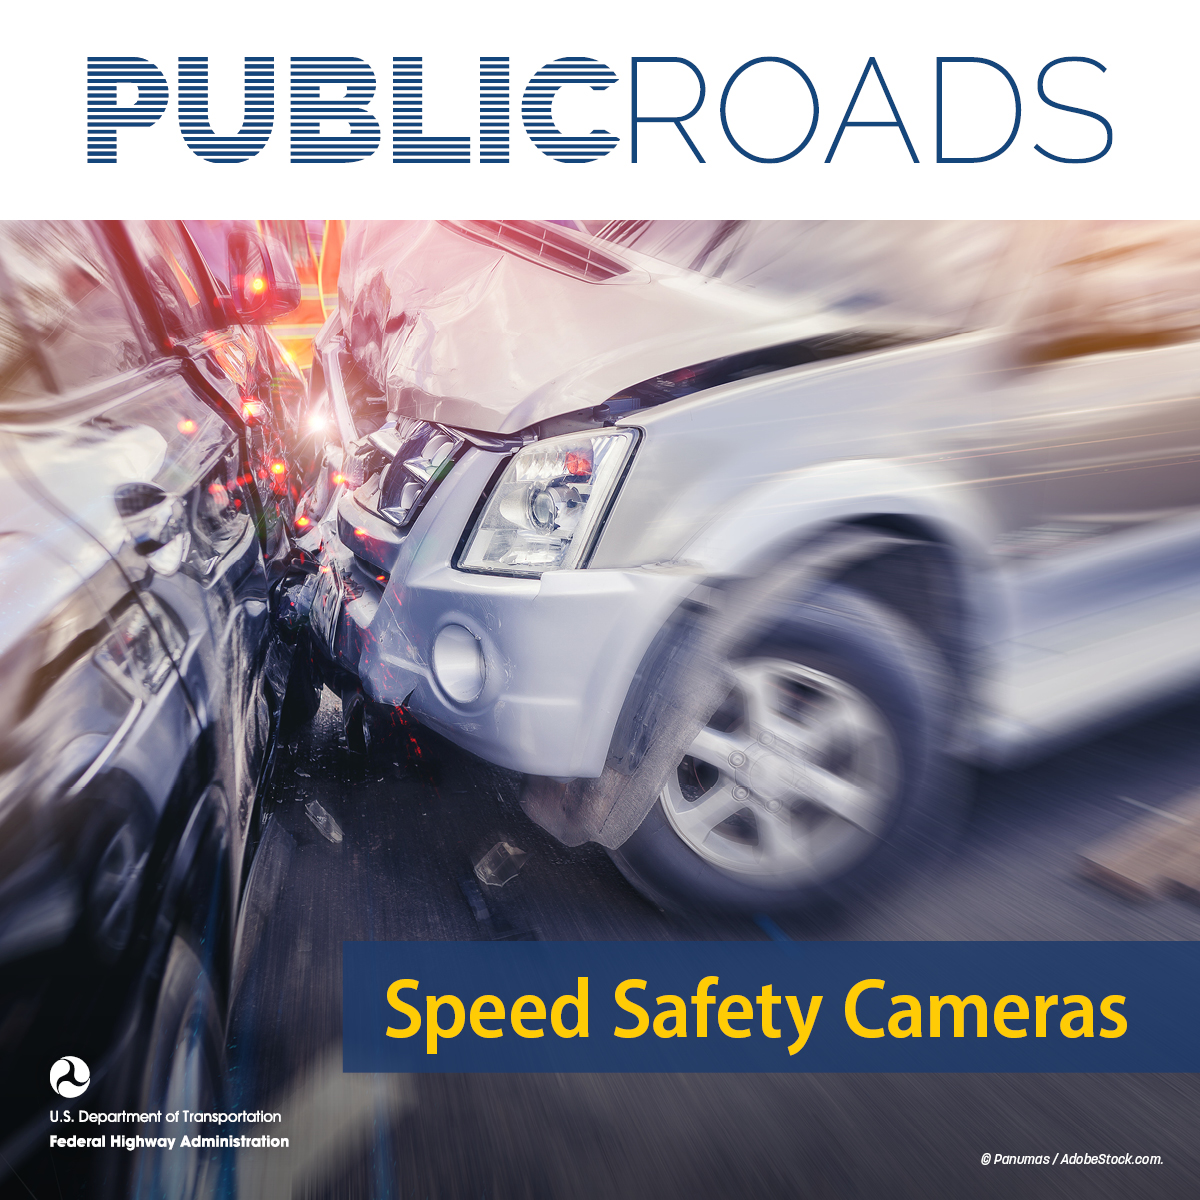 In January 2023, FHWA and @NHTSAgov published the Speed Safety Camera Program Planning and Operations Guide to assist practitioners considering the use of speed safety cameras. #PublicRoads bit.ly/48IItnj